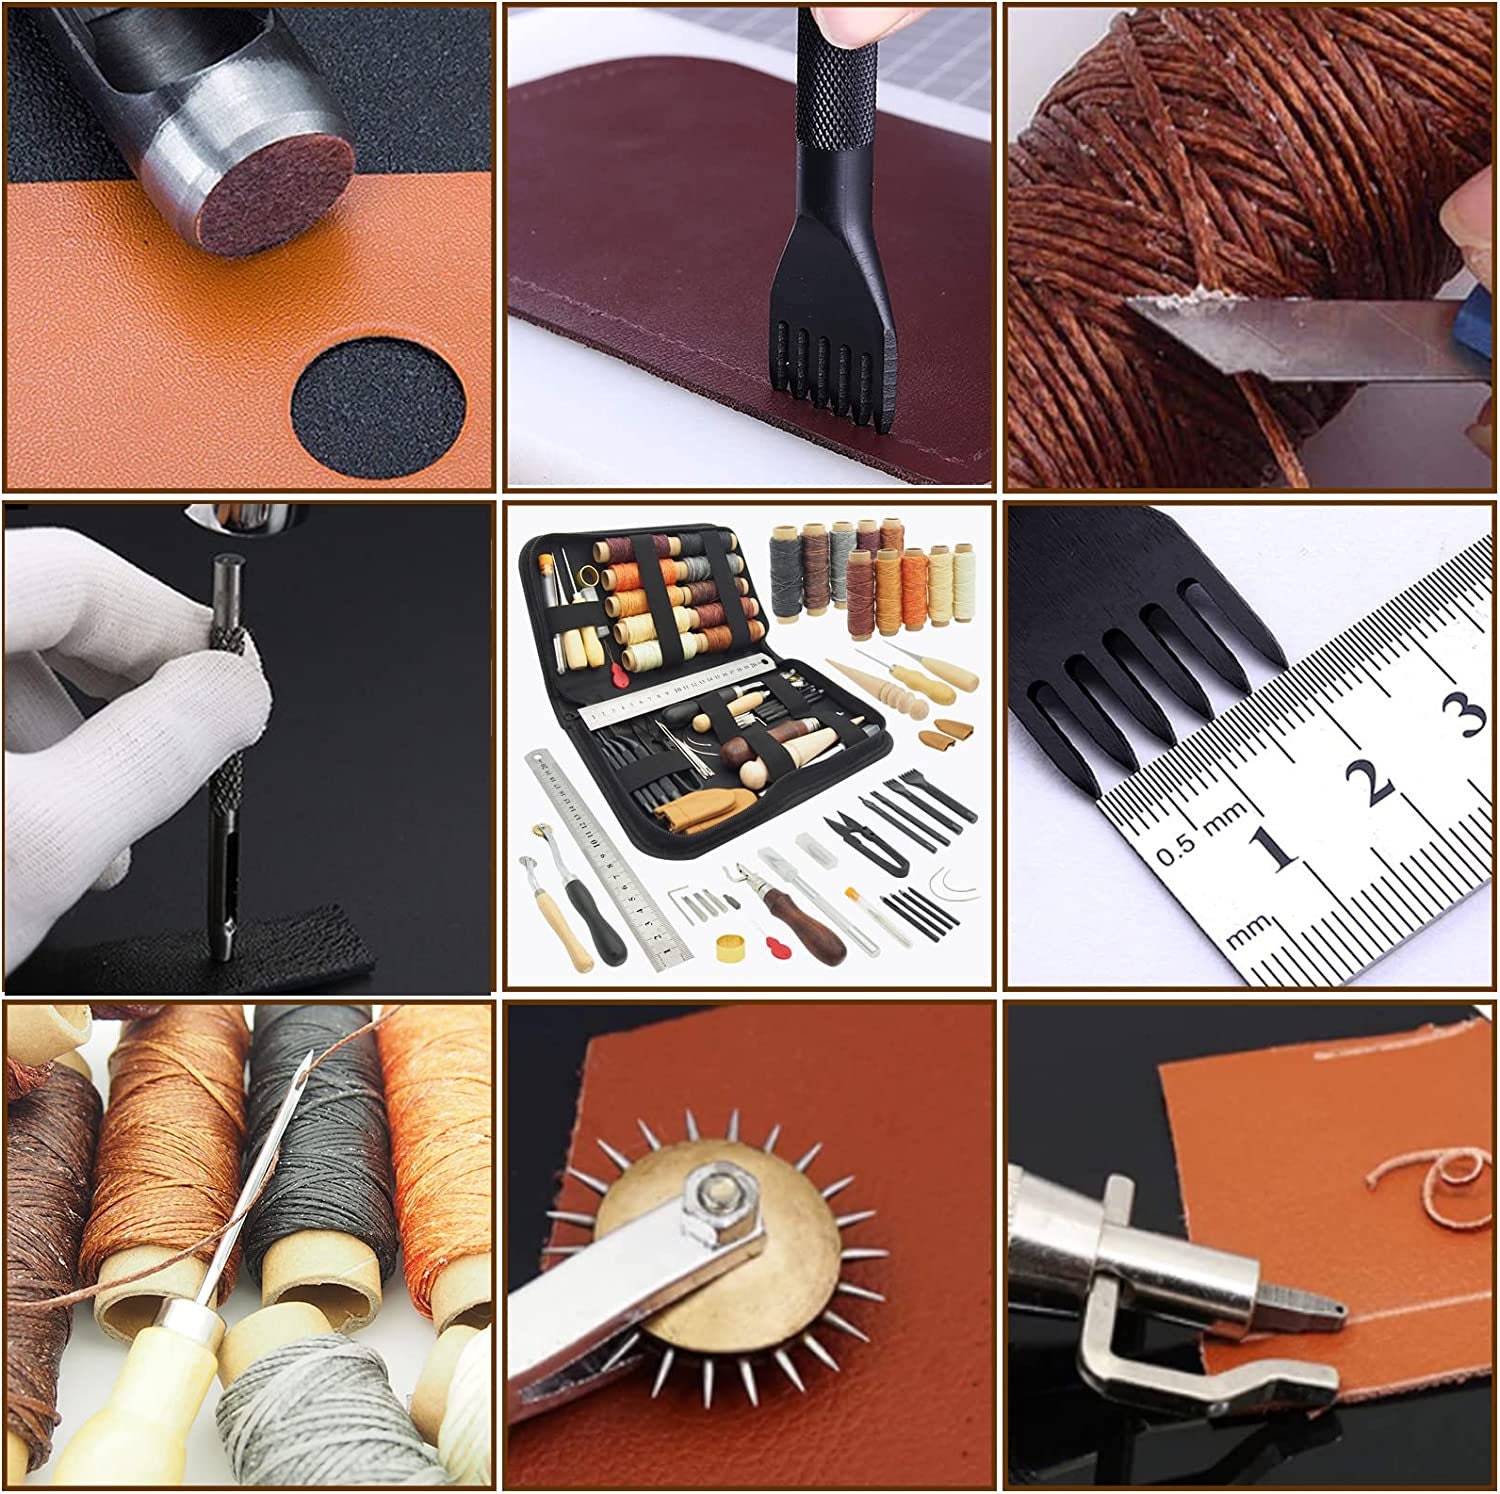 Professional / Basic Tools for Leather Craft Sewing DIY Hand